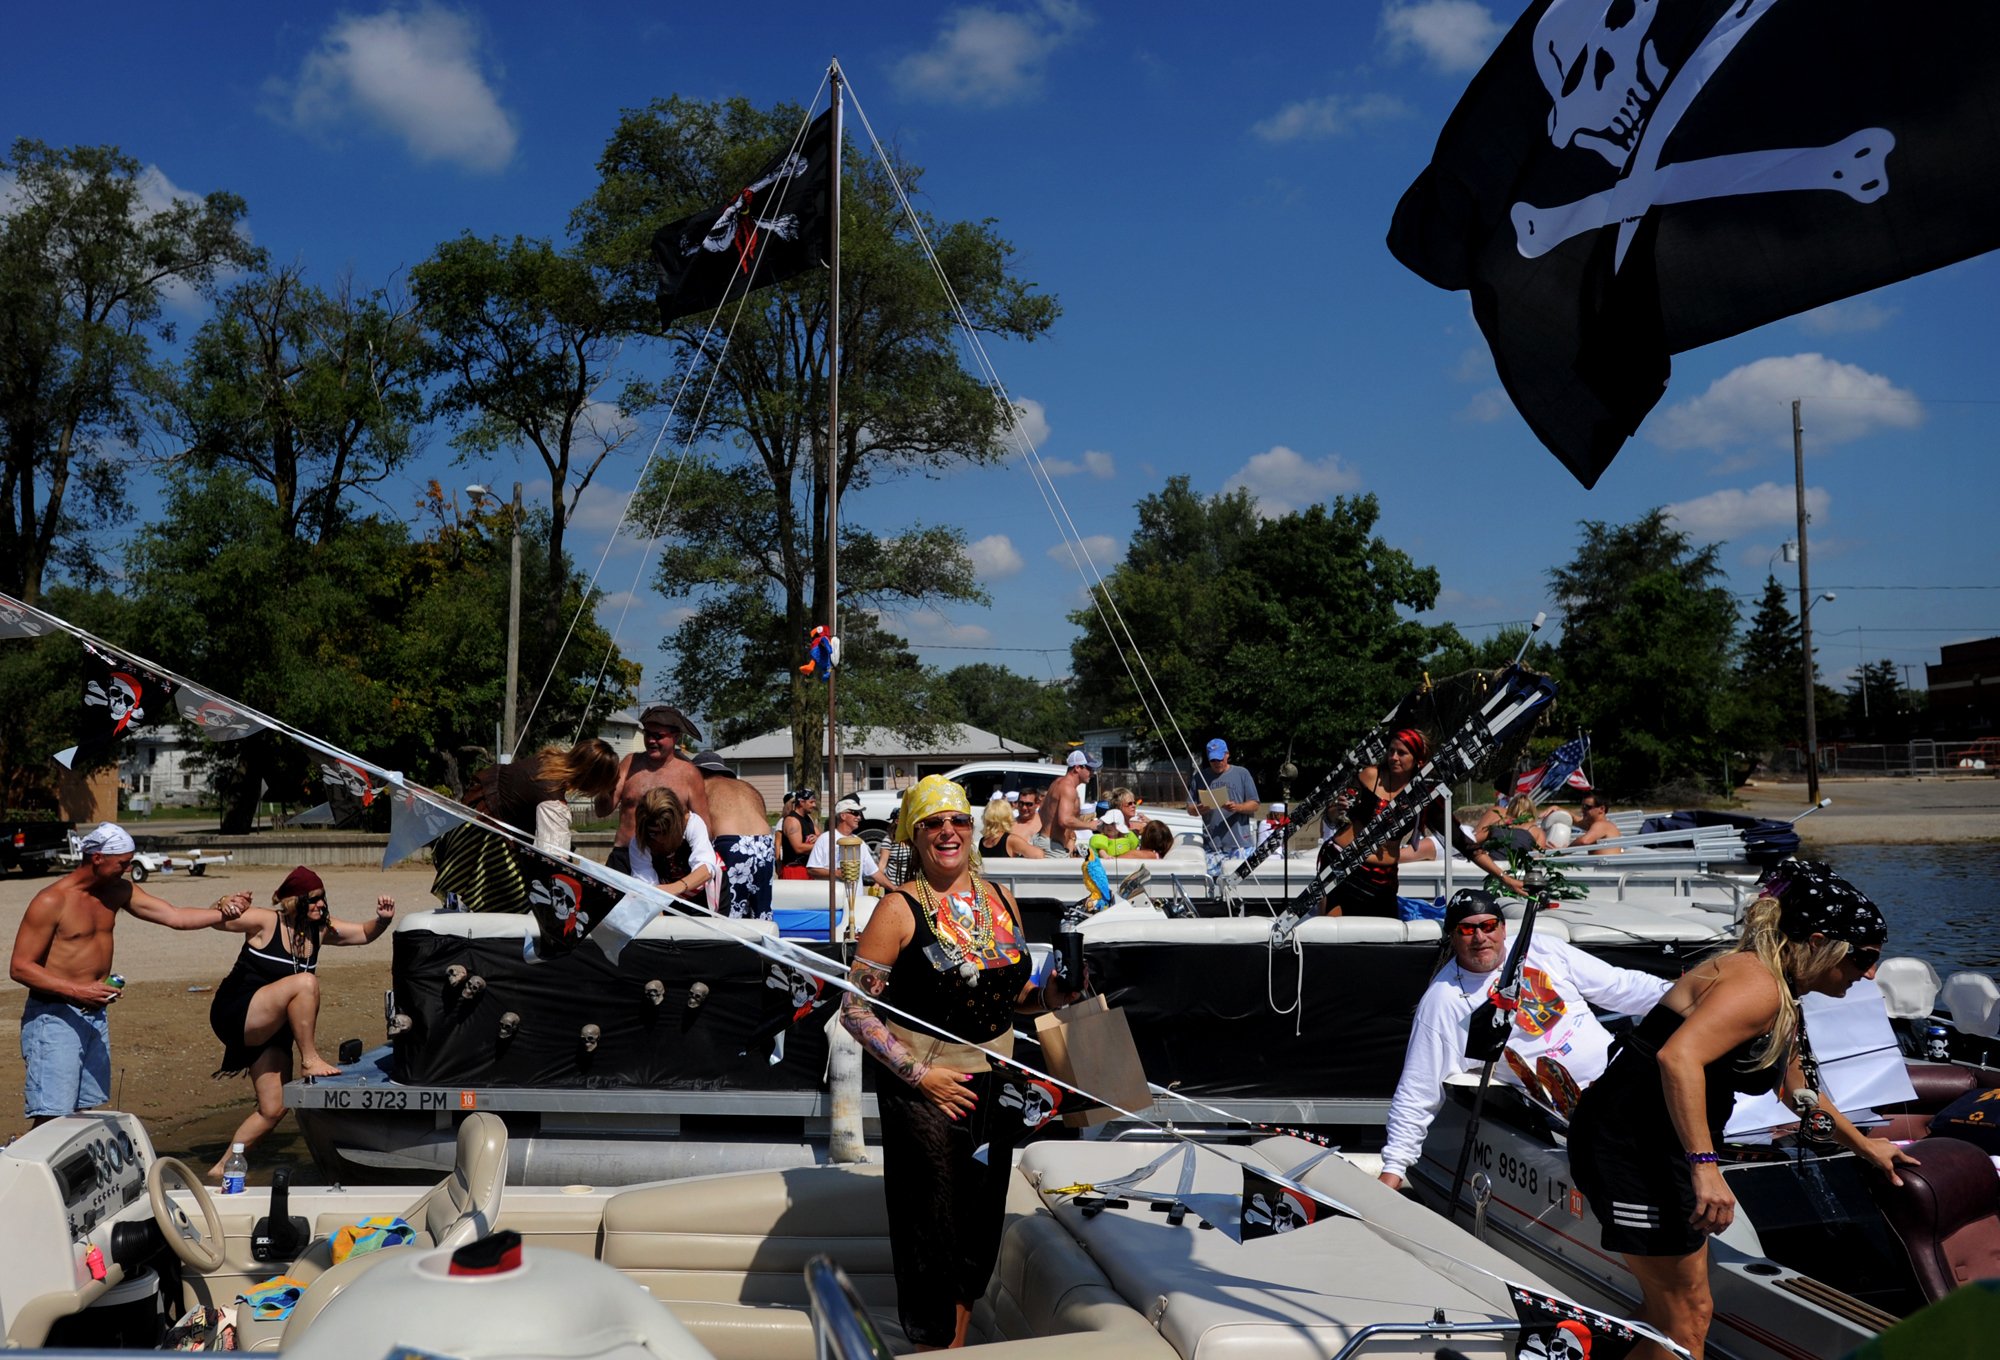  Mary Shannon of Michigan Center, Mich., center, laughs while she and other participants board their boats shortly before the start of a pirate-themed scavenger hunt at Michigan Center Lake on Sept. 5, 2009. This is the first time the scavenger hunt 